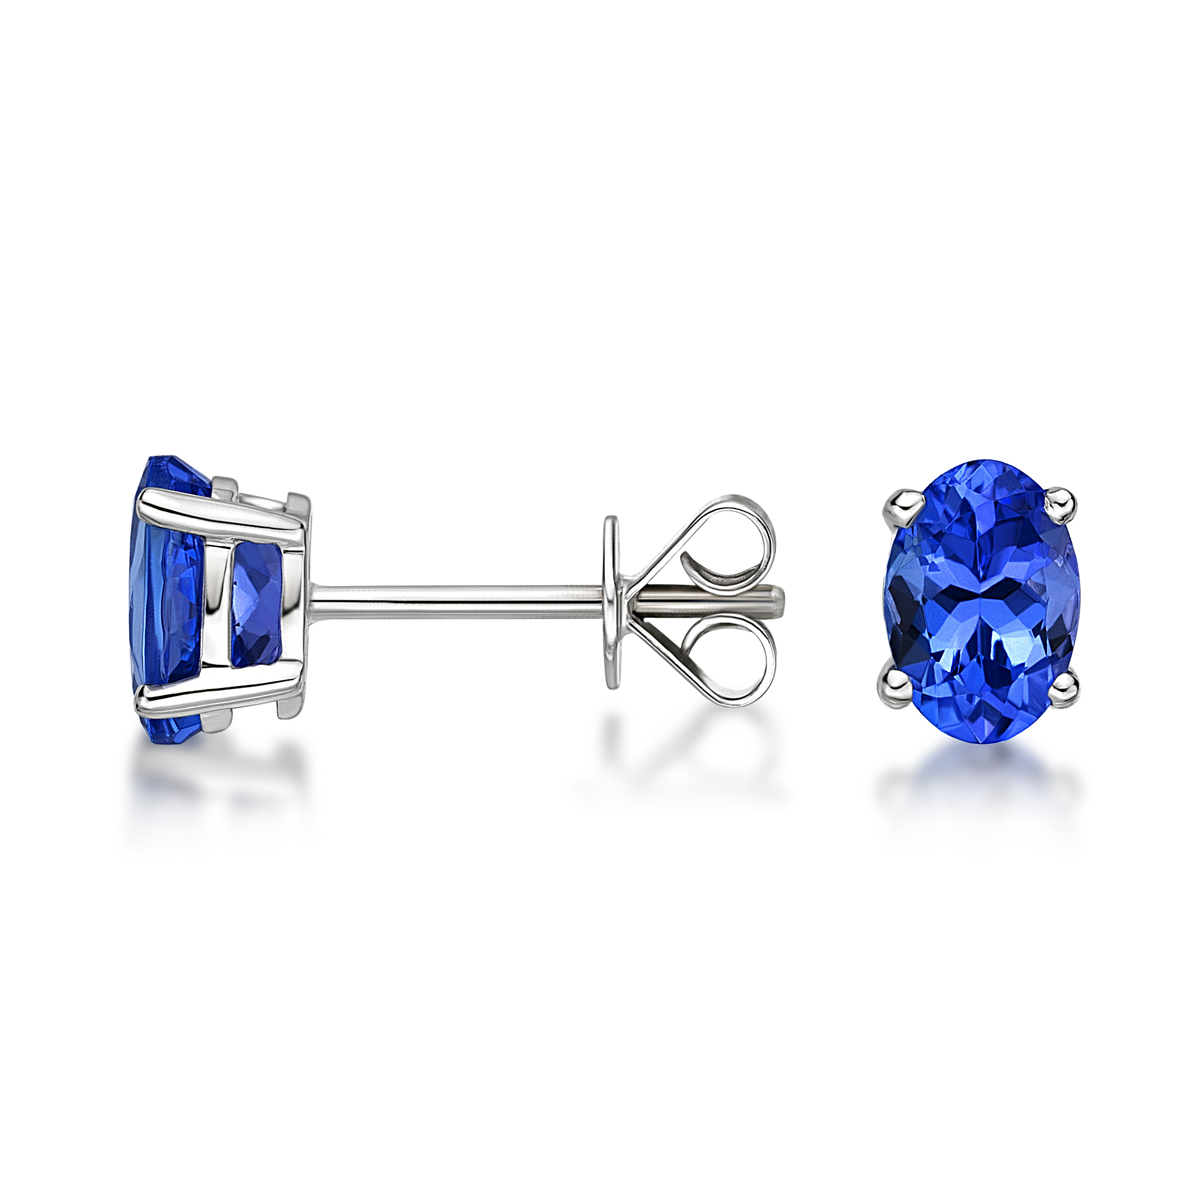 2 Ct Round Cut  Tanzanite Solid 14k White Gold Stud Earrings 